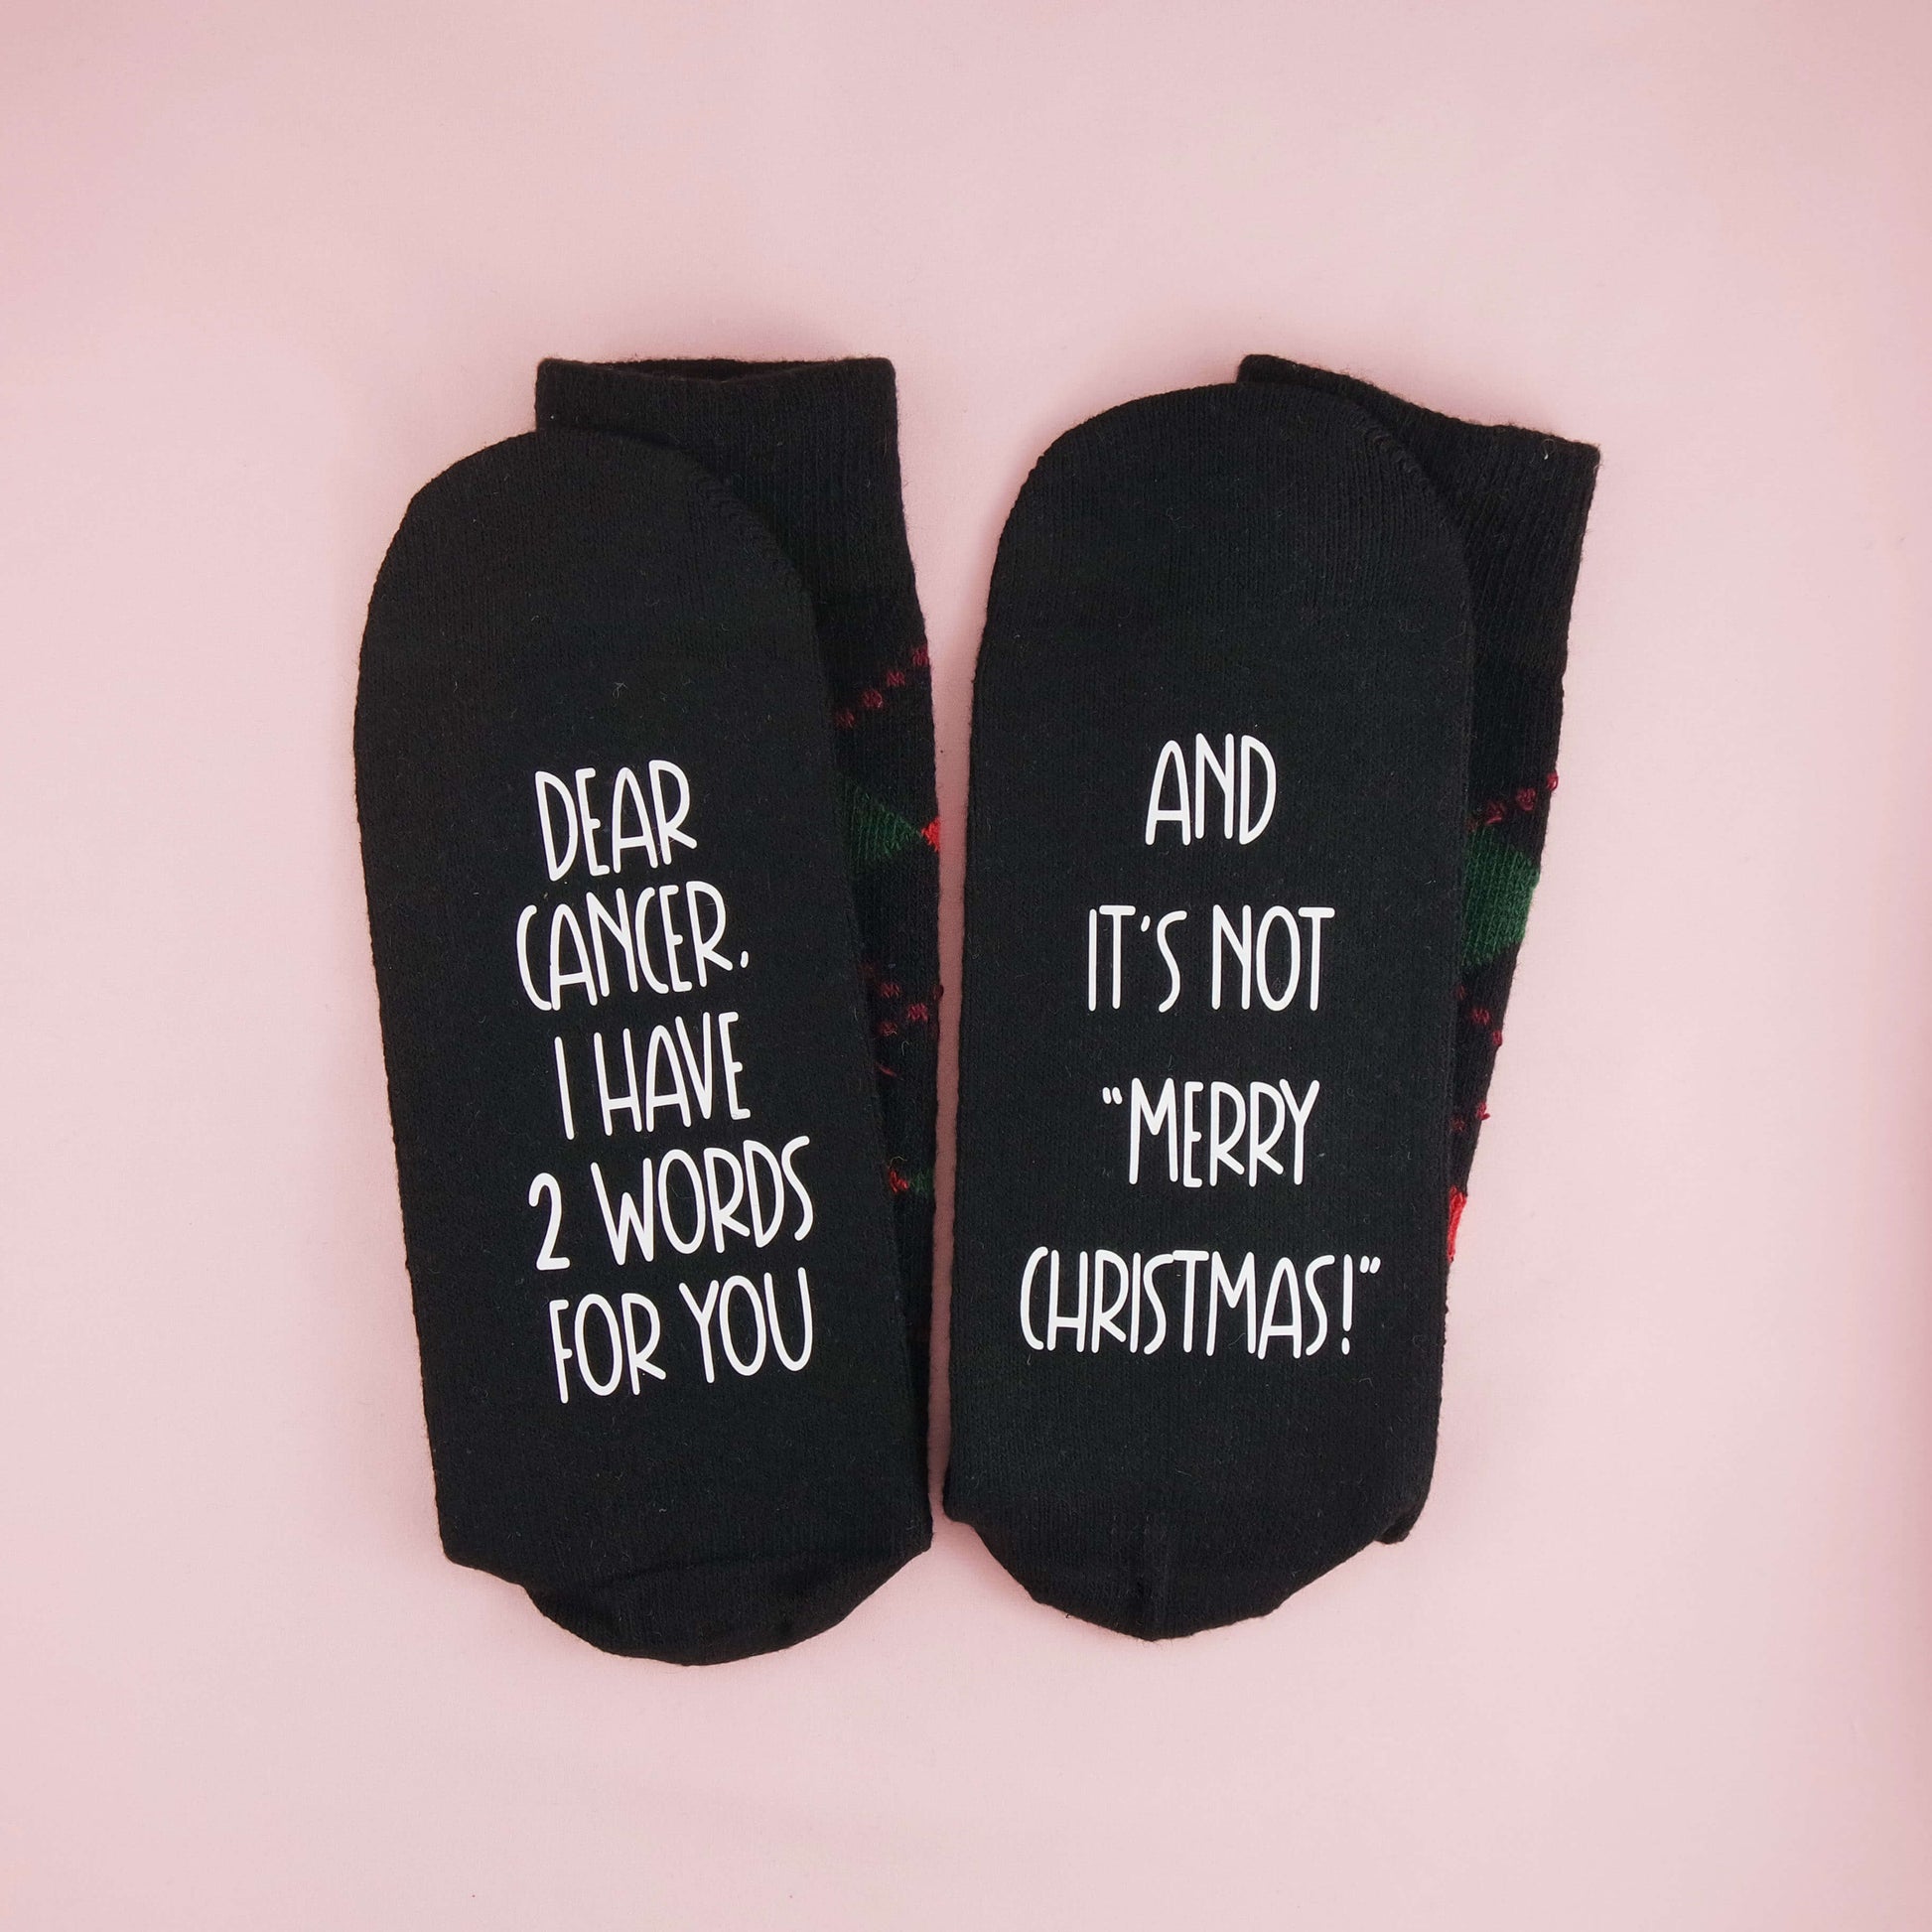 "Socks for men with a bold message directed at cancer, reflecting a fighting spirit."